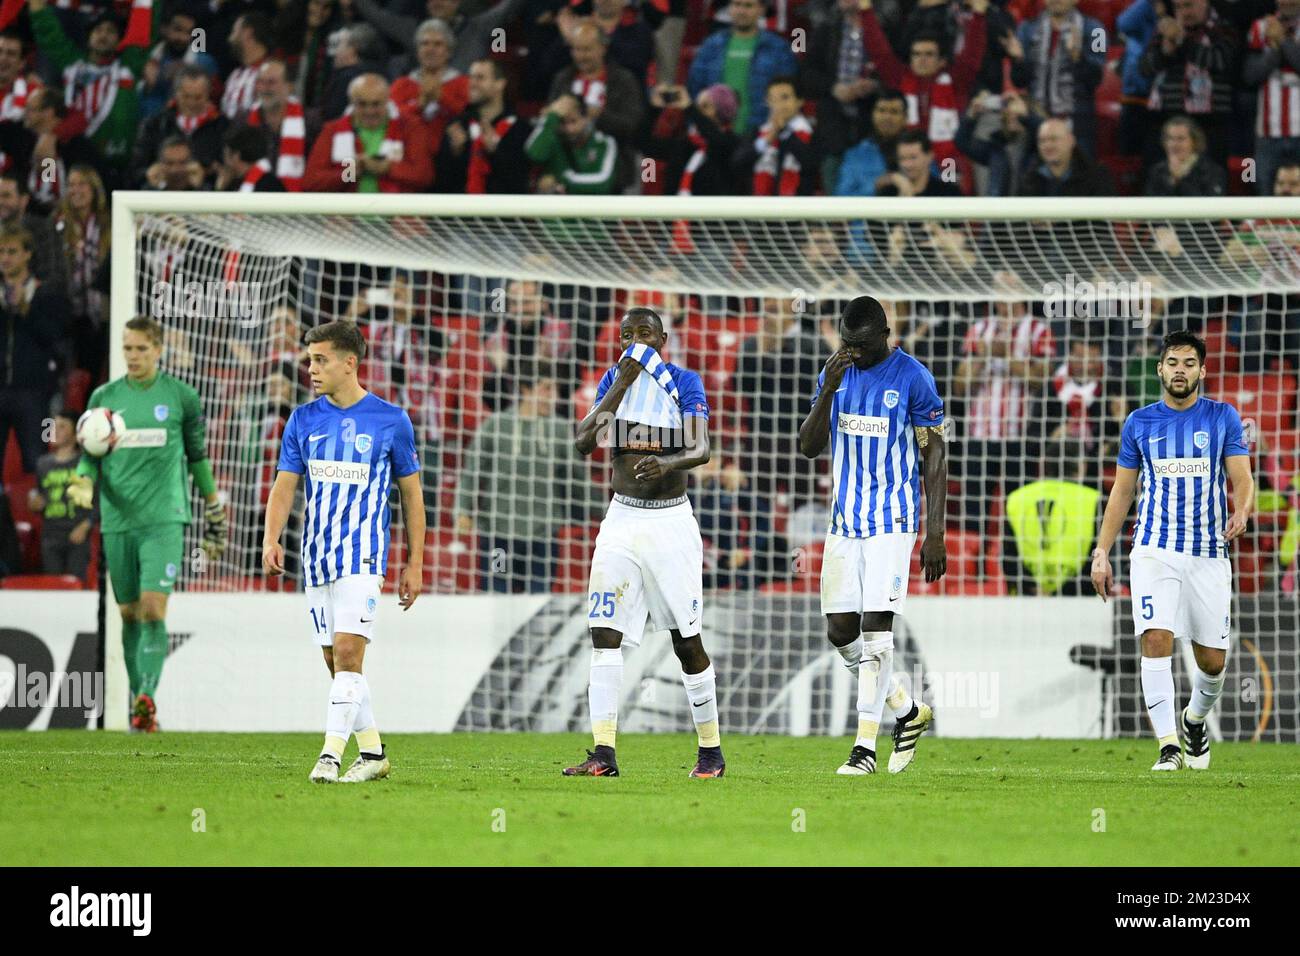 Genk's goalkeeper Marco Bizot, Genk's Leandro Trossard, Genk's Wilfried Onyinye Ndidi, Genk's Omar Colley and Genk's Sandy Walsh pictured during a soccer game between Spanish Club Athletic Bilbao and Belgian team KRC Genk in Bilbao, Spain, Thursday 03 November 2016, the fourth game of the group stage of the Europa League competition in Group F. BELGA PHOTO YORICK JANSENS Stock Photo